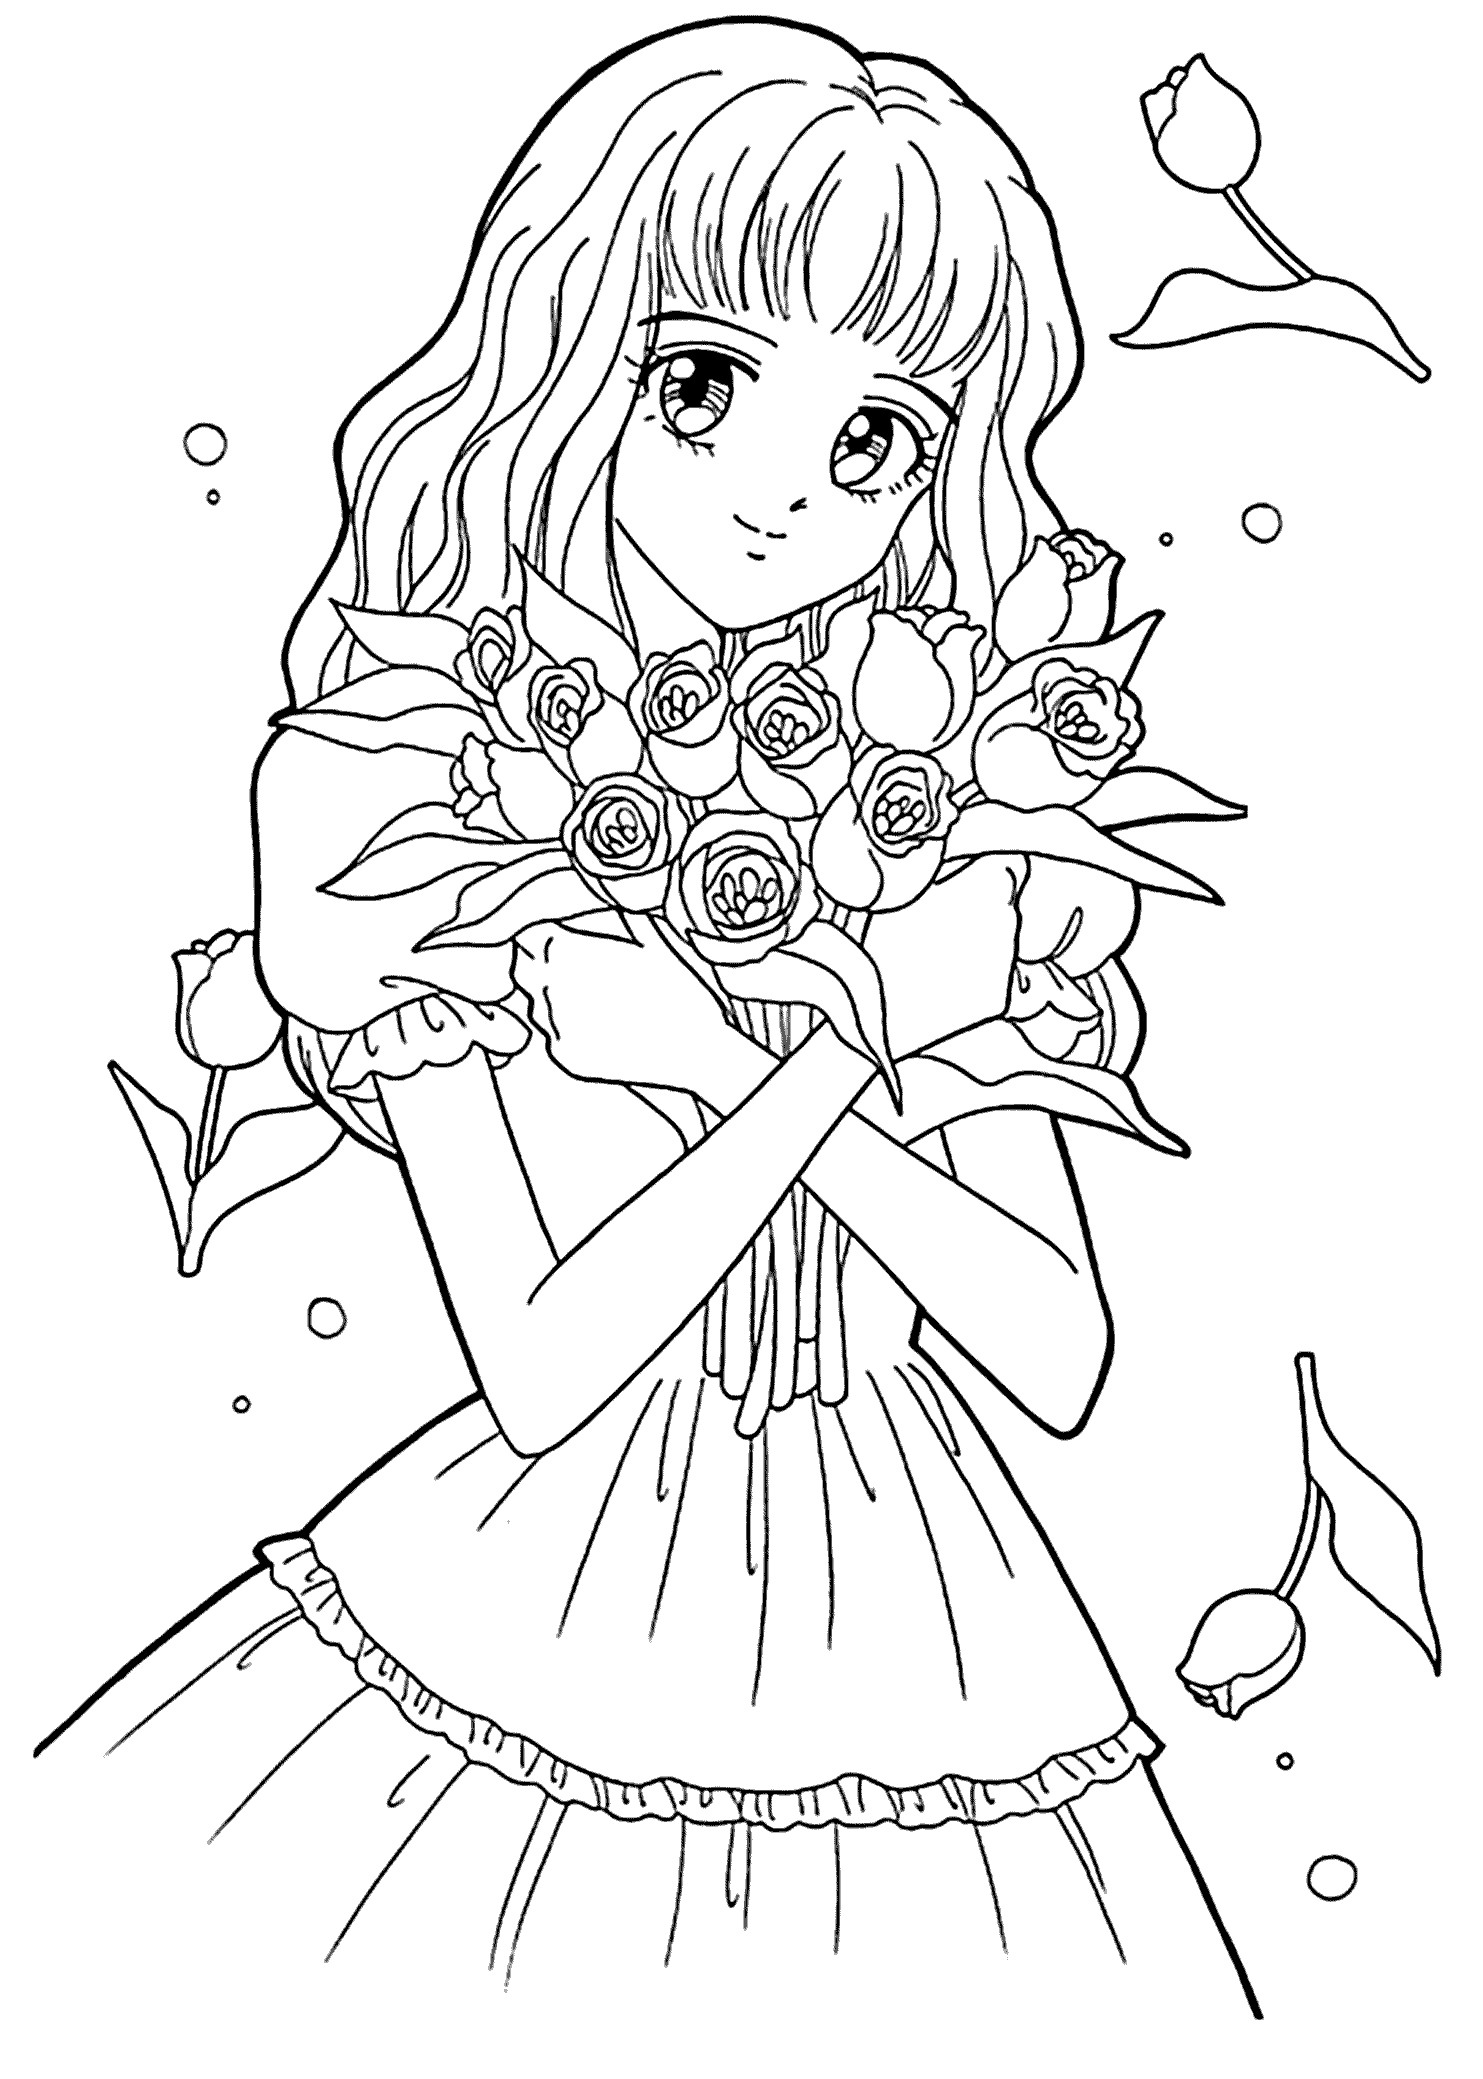 Coloring Sheet For Girls
 Best Free Printable Coloring Pages for Kids and Teens